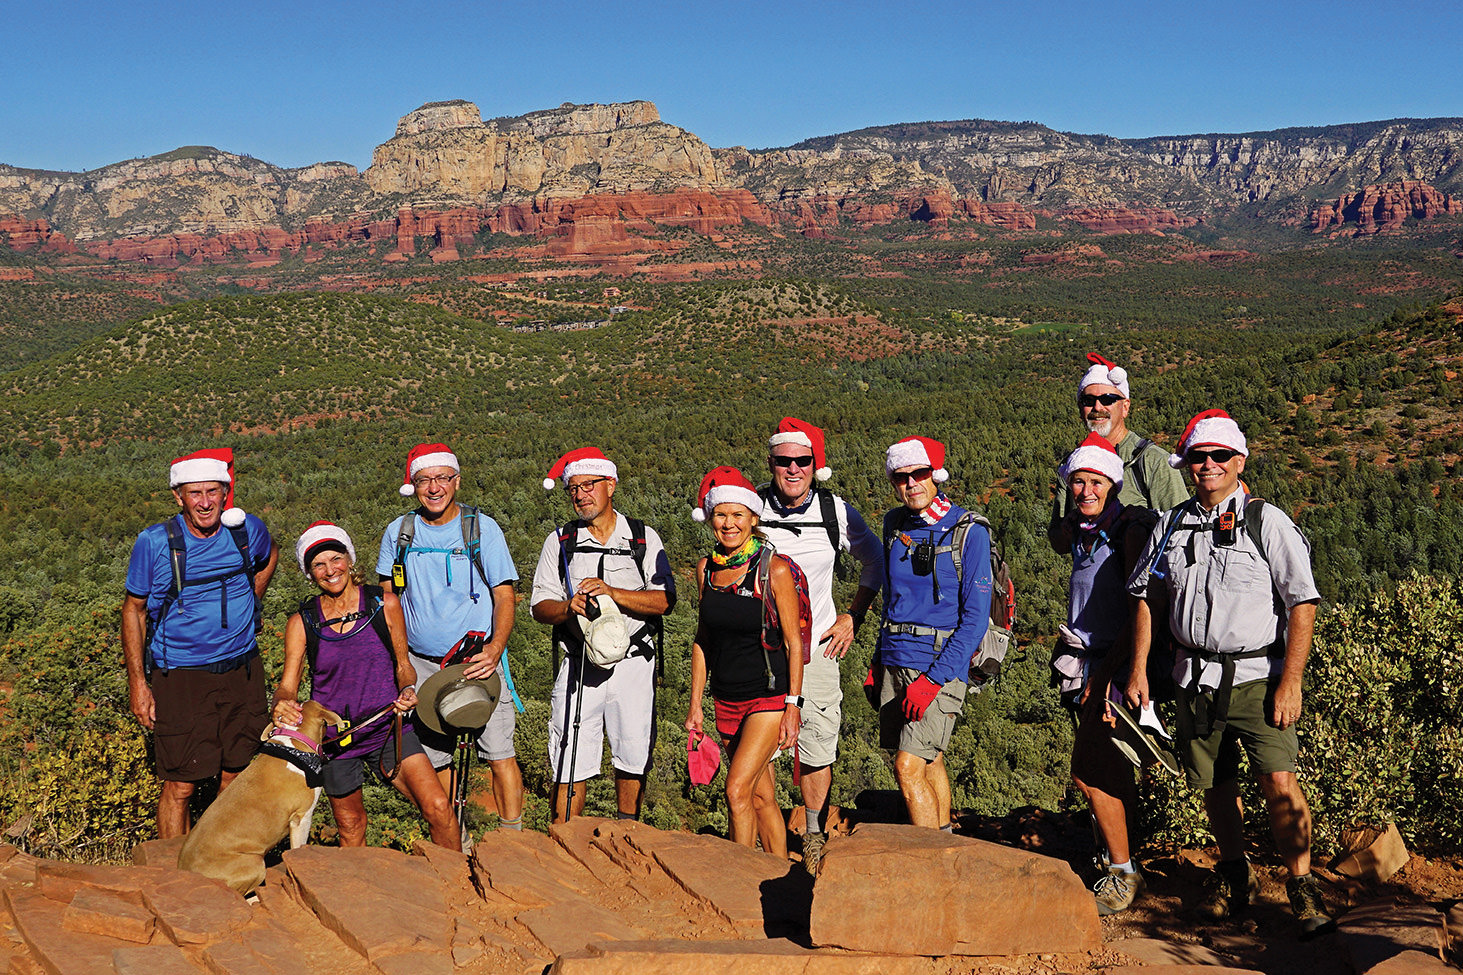 Left to right: Clare Bangs, Annie (guest dog), Marilyn Reynolds, Wayne Wills, Ron Hoffman, Kris Raczkiewicz, Mike Trapp, Lynn Warren (photographer), Eileen and Leon Mosse, and Neal Wring pausing on the Devil’s Bridge trail with beautiful Sedona scenery in the background.